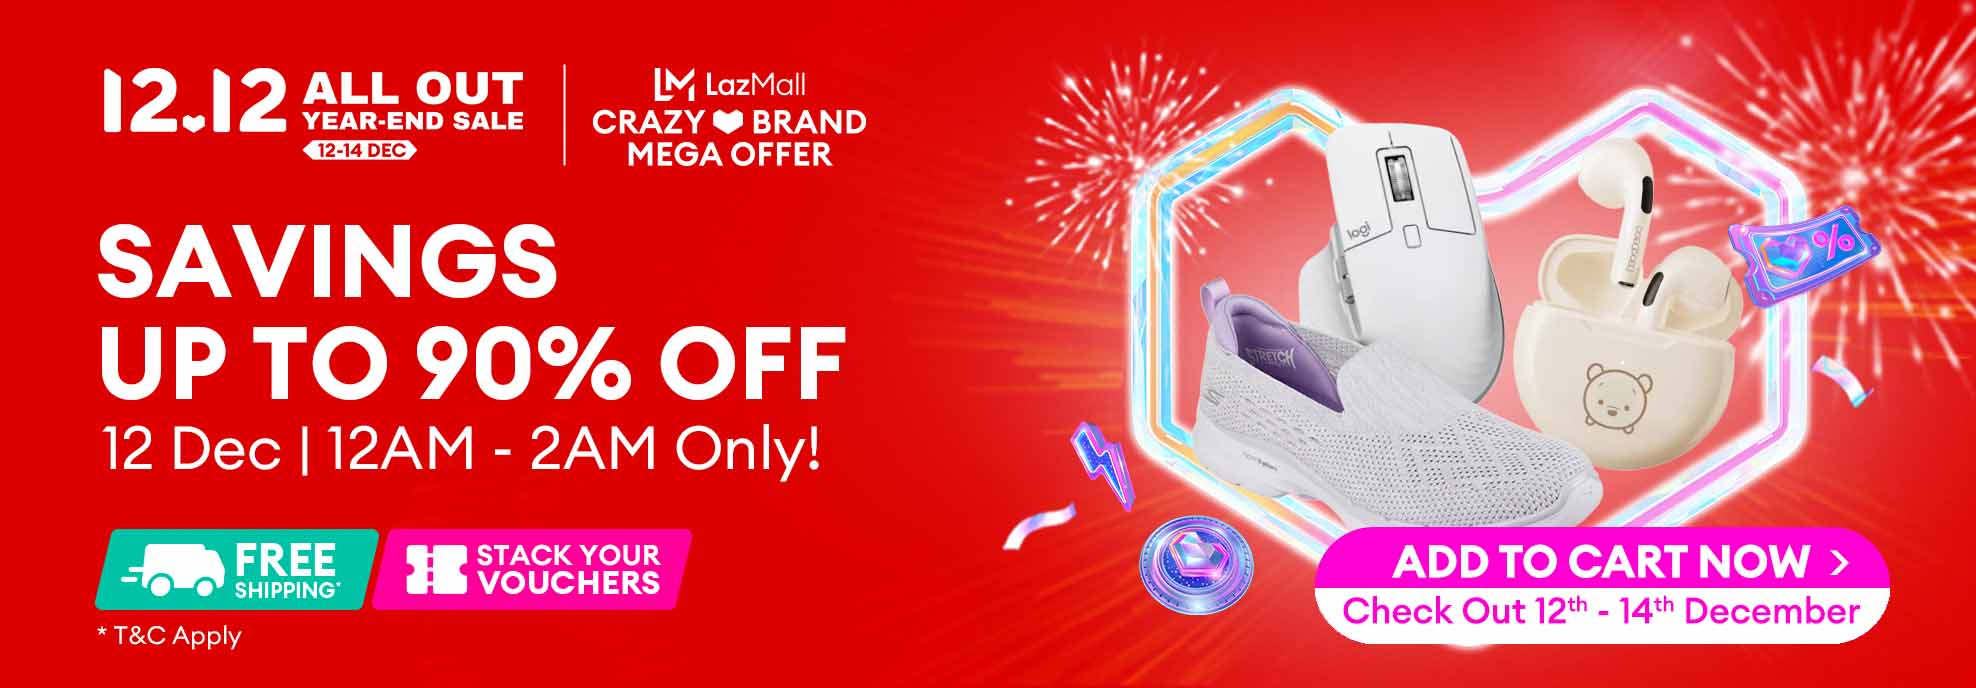 12.12 All Out Year-End Sale - Crazy Brand Mega Offer